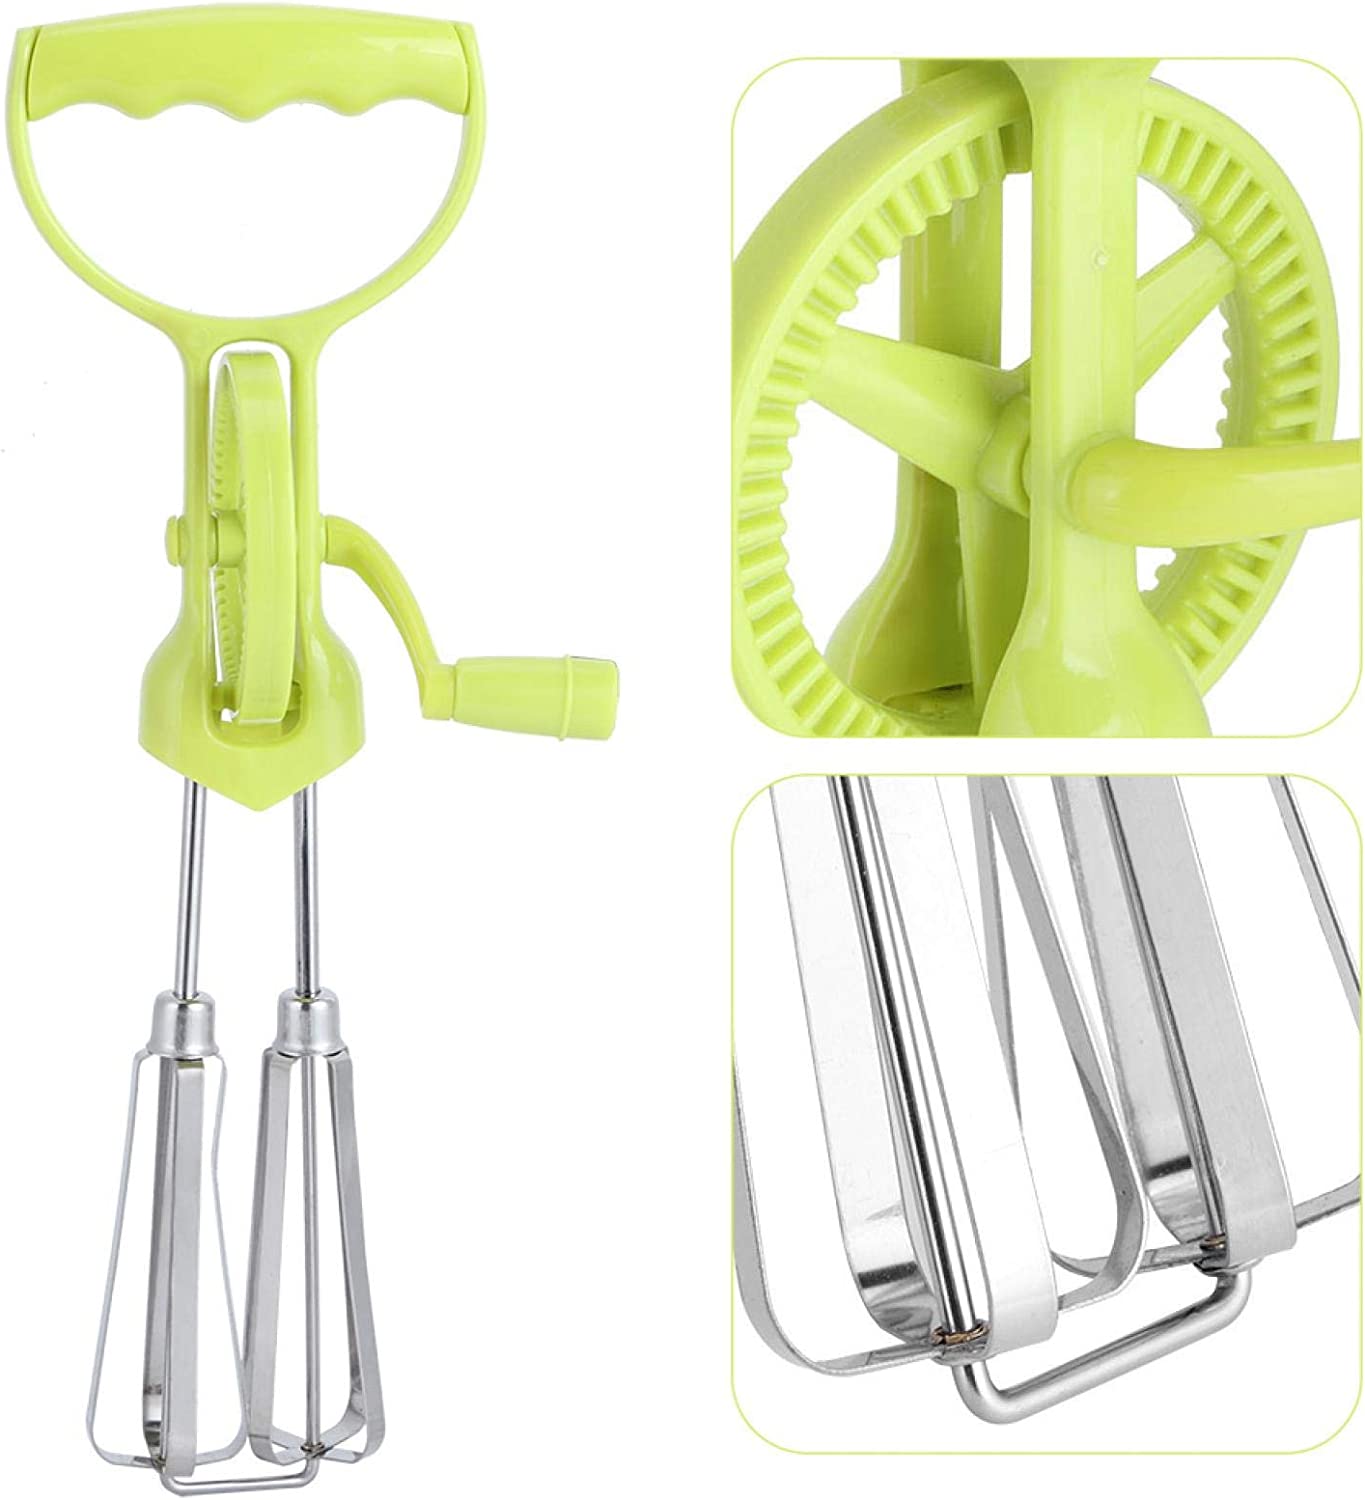 Hand Mixture Hand Beater by Classic Kitchenware